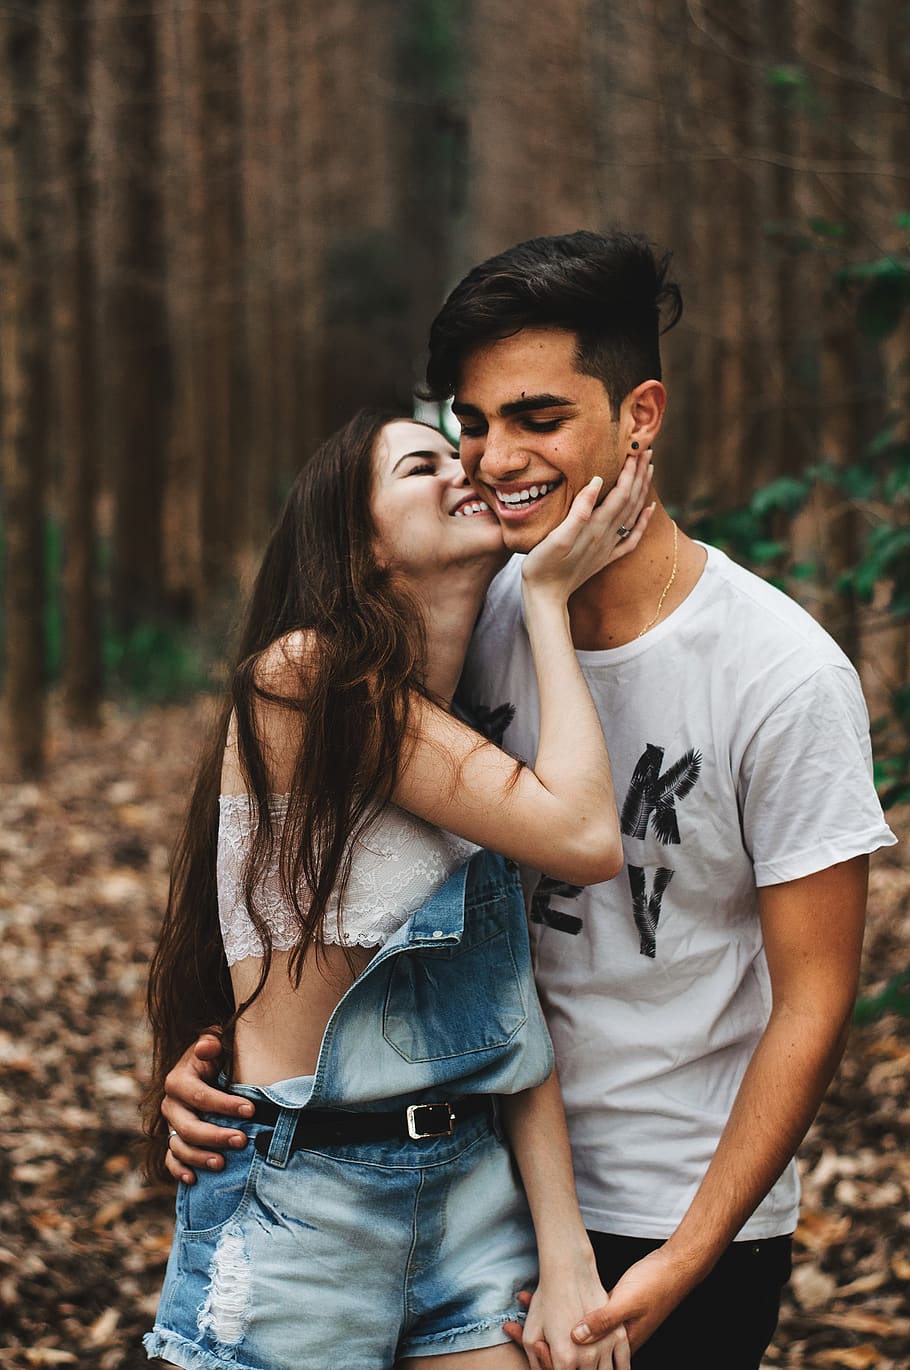 1082x1922px | free download | HD wallpaper: Woman About to Kiss the Man at  the Forest, beautiful, blurred background | Wallpaper Flare